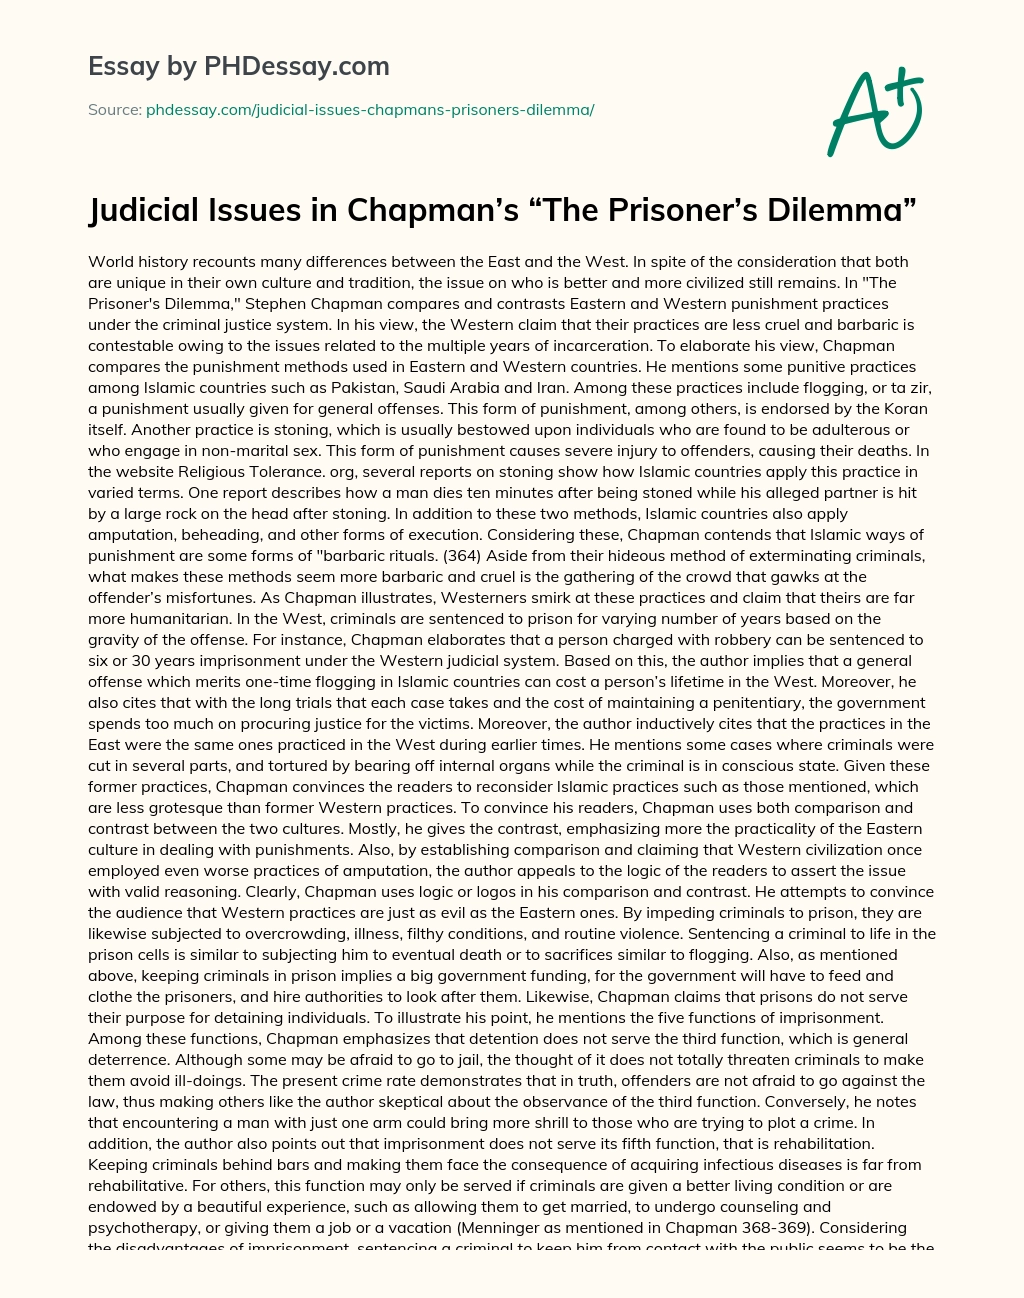 Judicial Issues in Chapman’s “The Prisoner’s Dilemma” essay